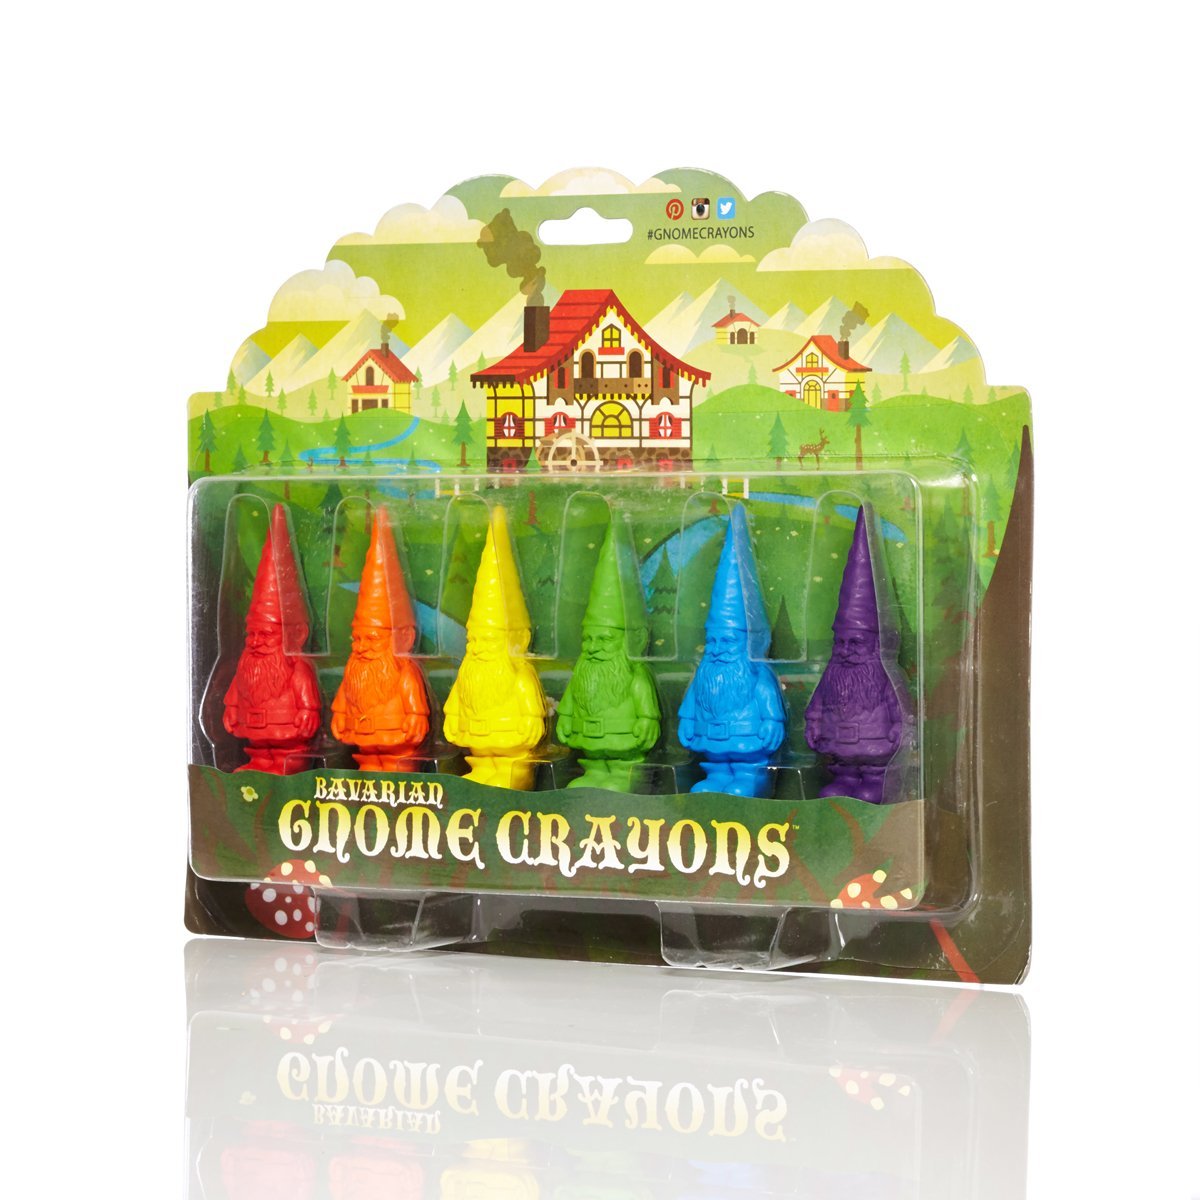 Gnome Crayons side view